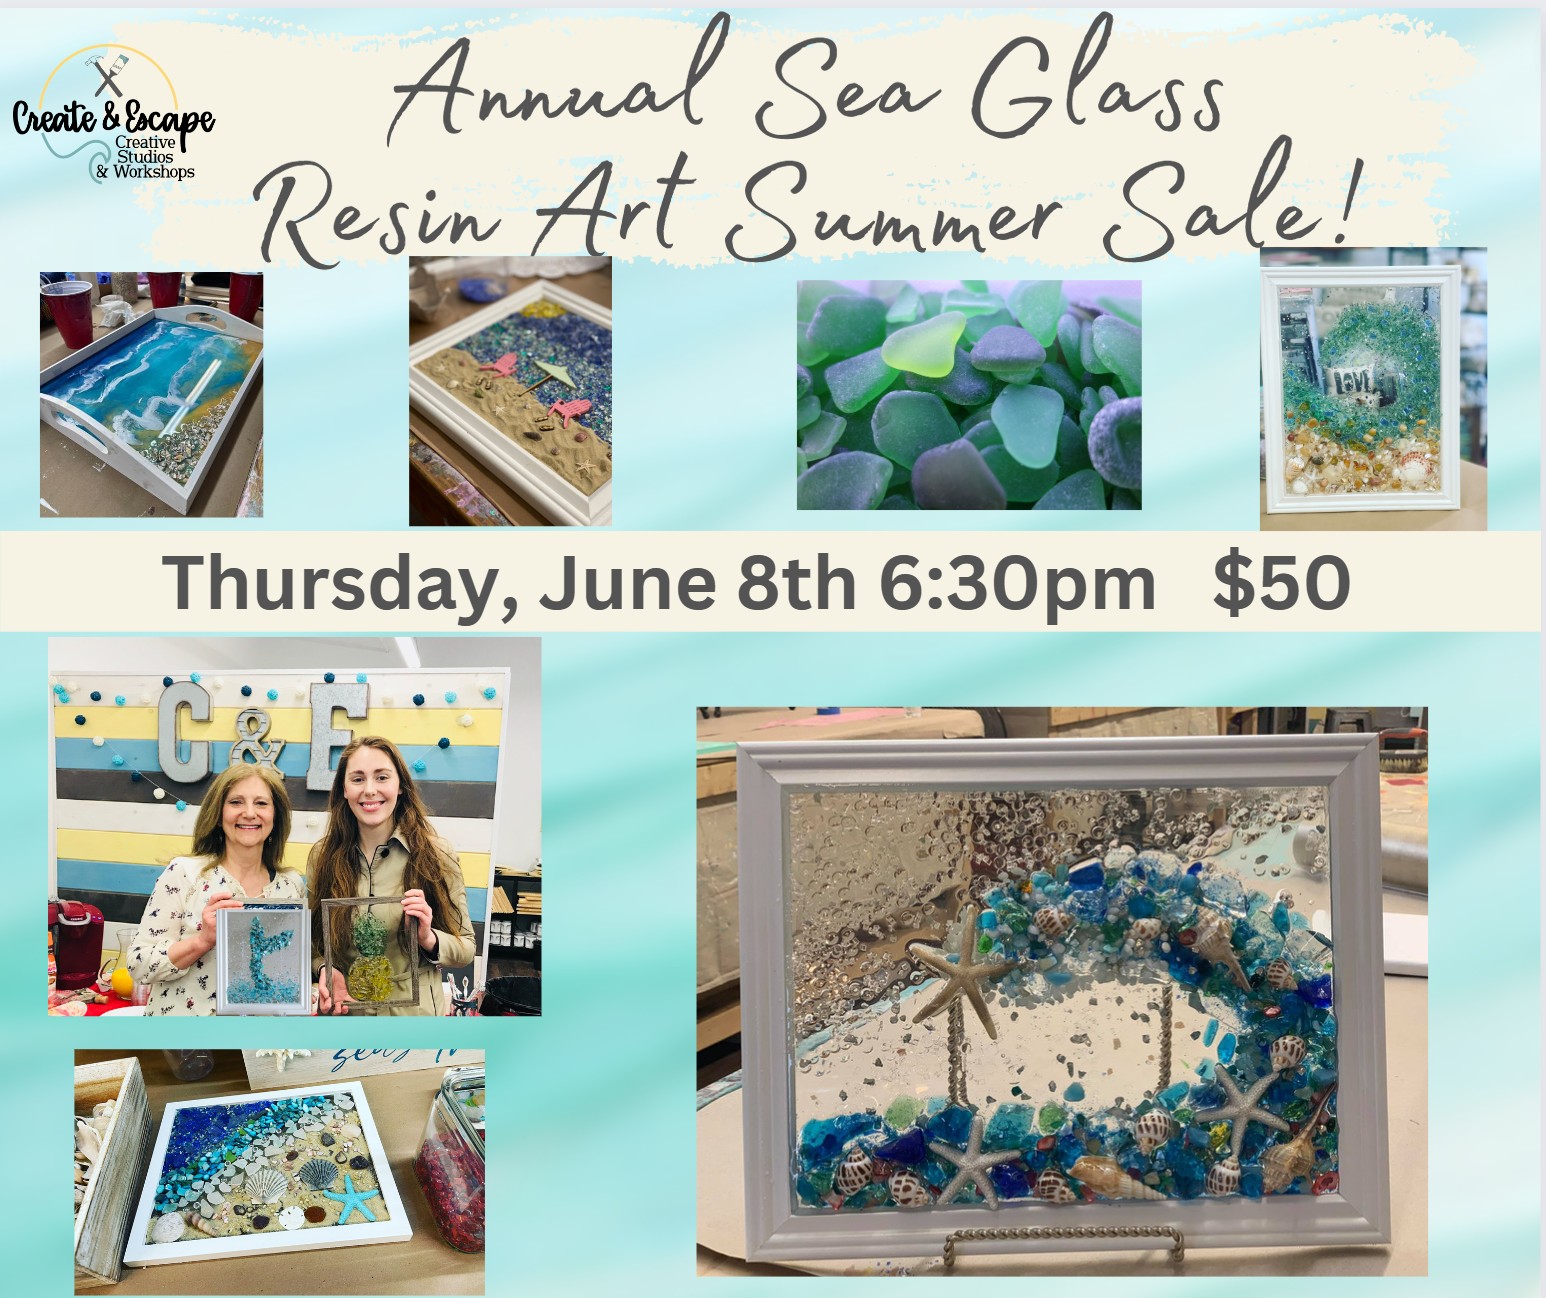 a poster for an art class with pictures of sea glass.